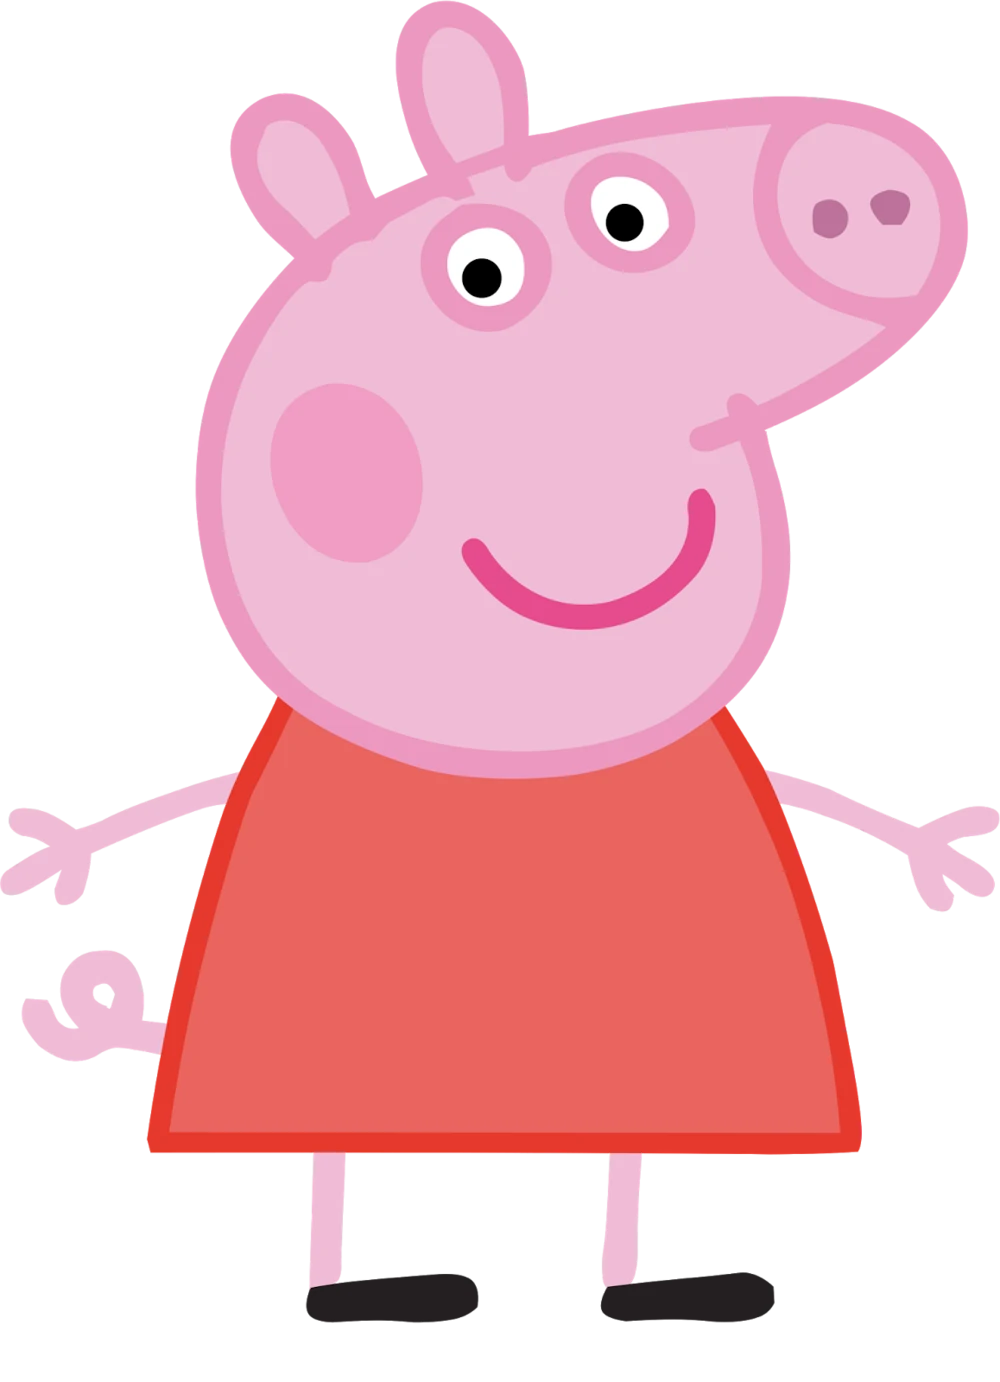 https://static.wikia.nocookie.net/heroic-benchmark/images/8/89/Peppa_Pig.webp/revision/latest?cb=20221024004939